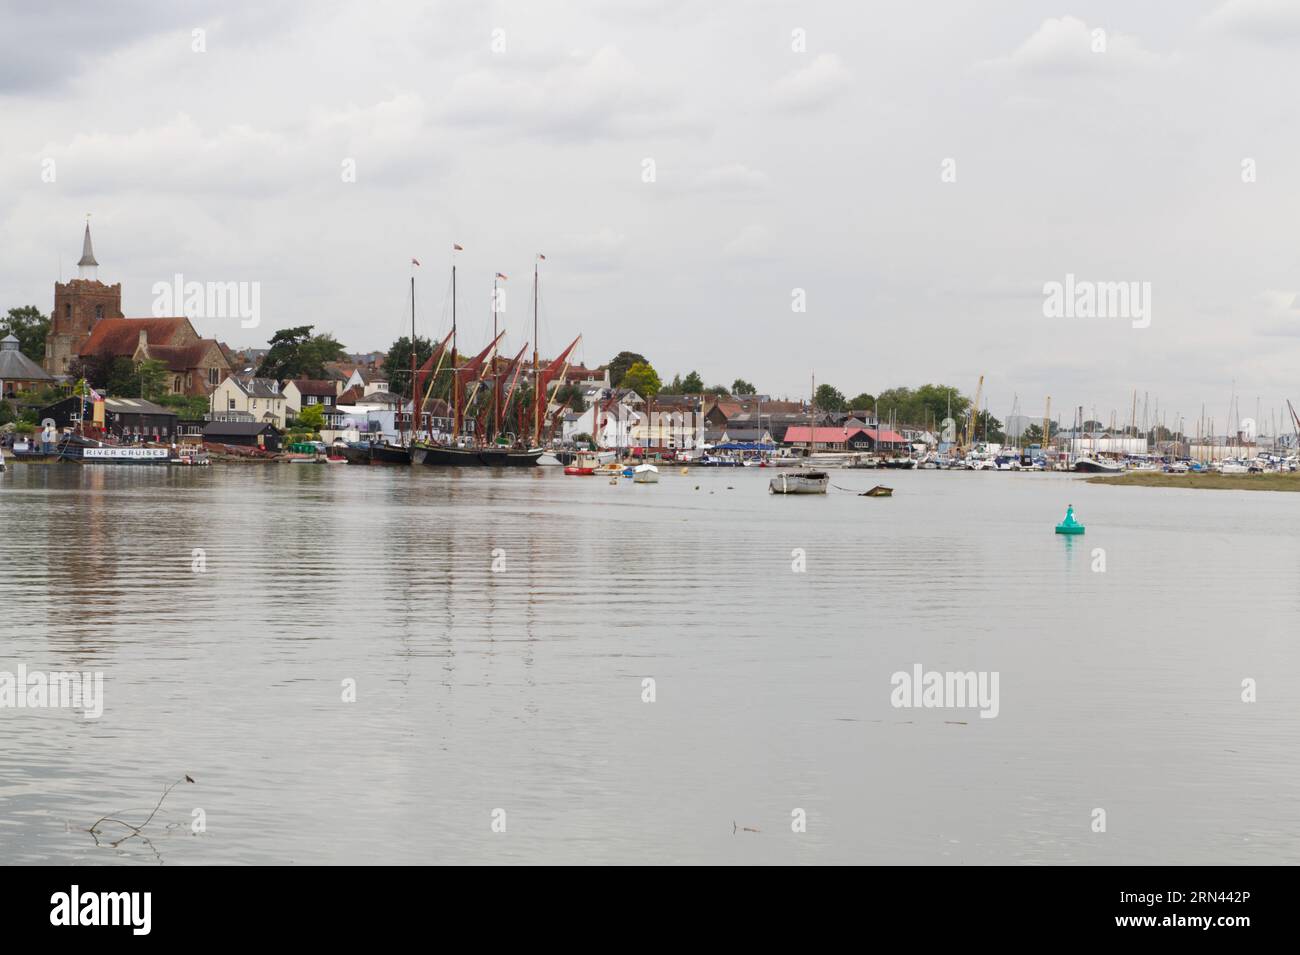 View towards the Hythe Quay, Maldon, Essex on the bank of the River Chelmer Stock Photo